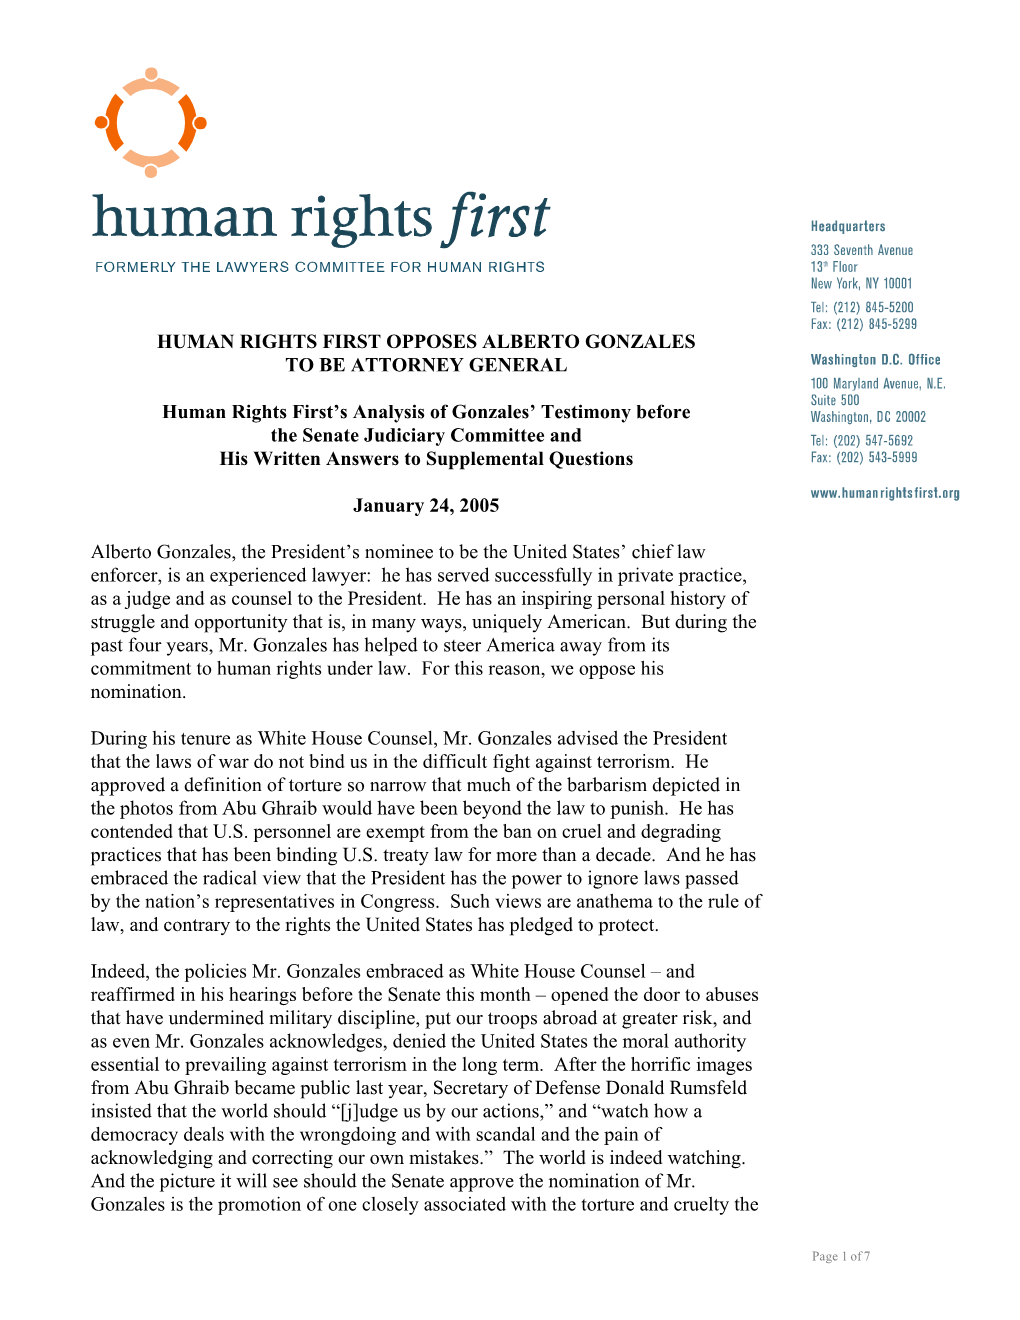 Human Rights First's Analysis of Gonzales' Testimony Before the Senate Judiciary Committee